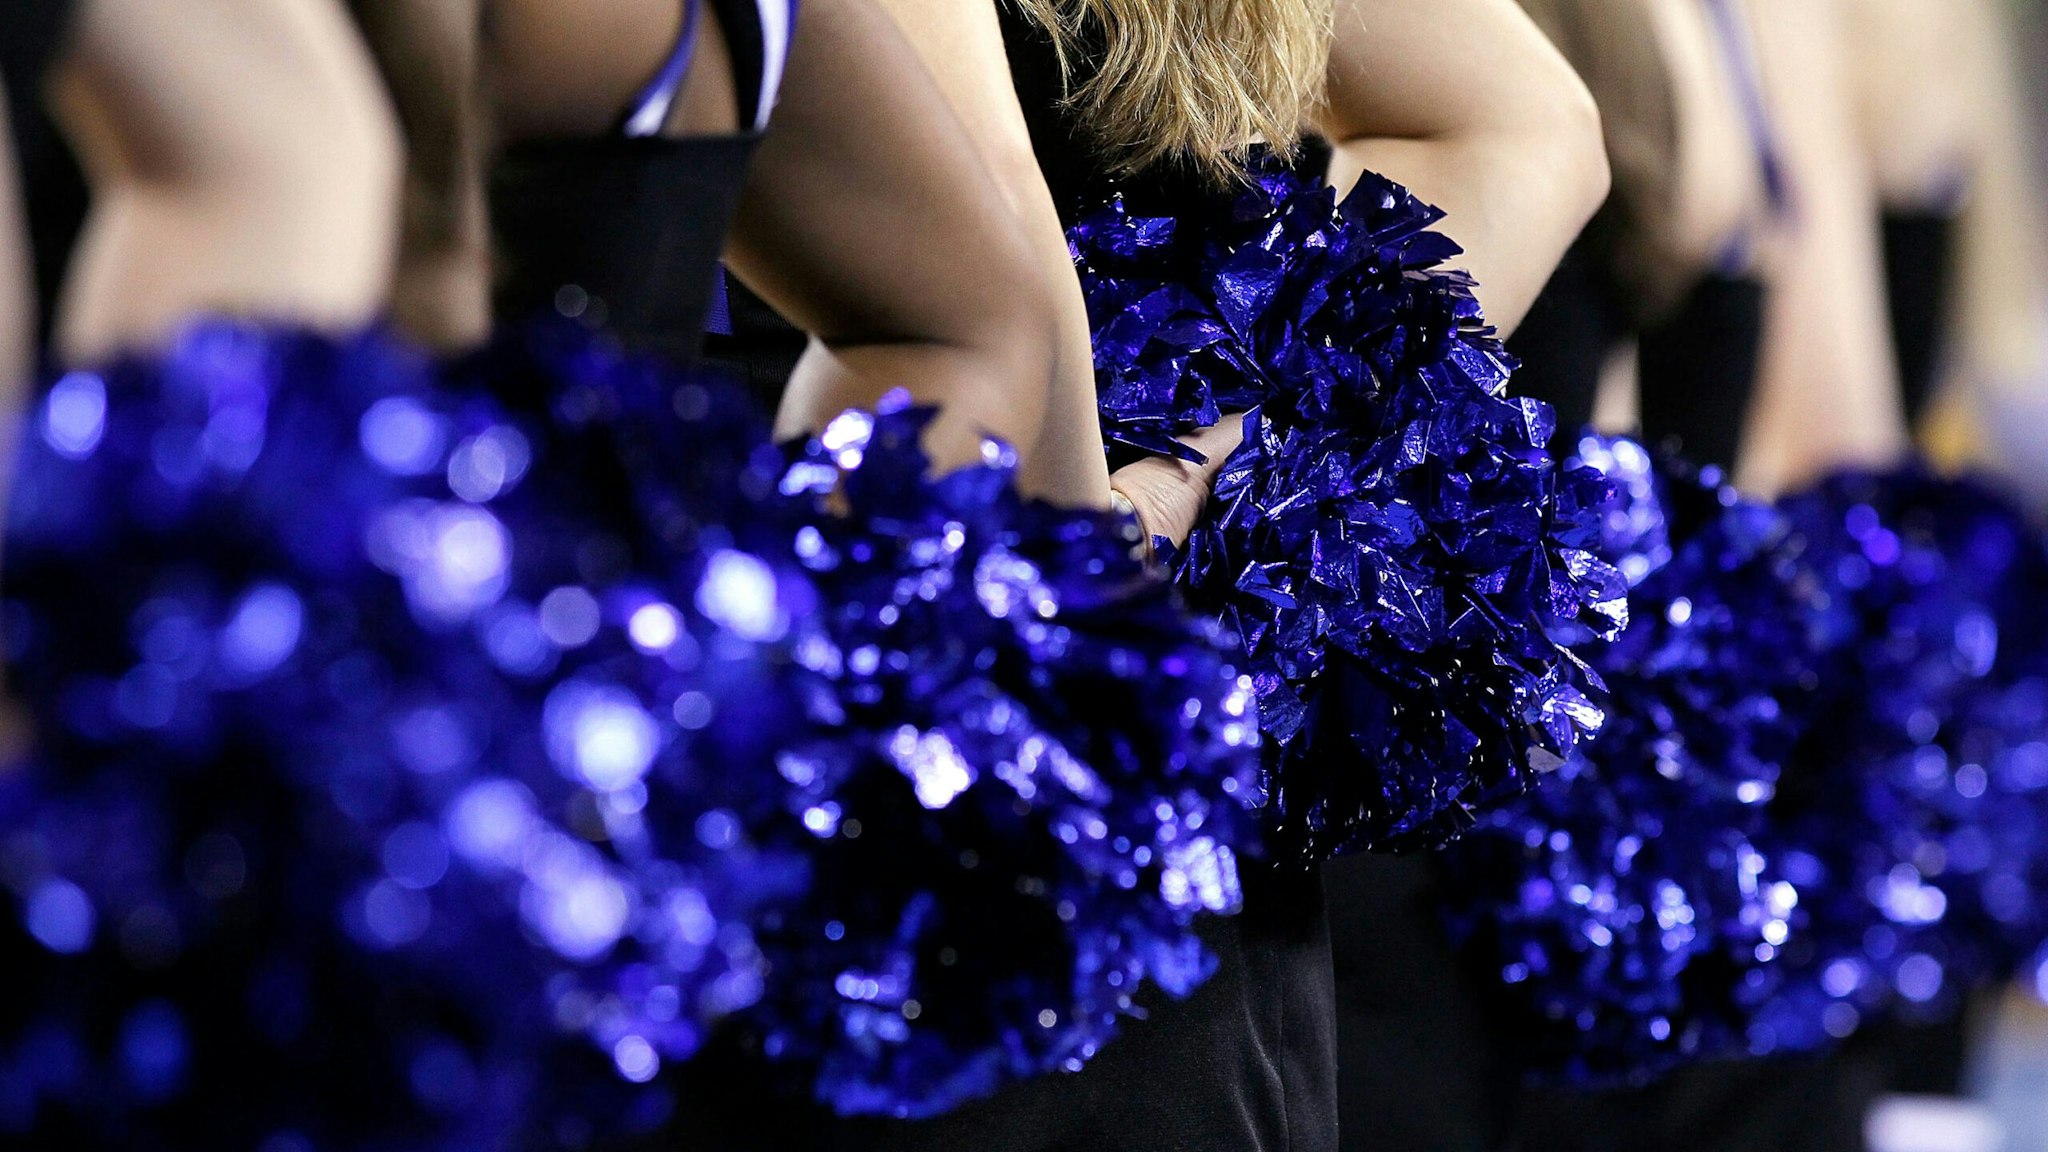 INDIANAPOLIS - APRIL 03: The Duke Blue Devils cheerleaders perform while taking on the West Virginia Mountaineers during the National Semifinal game of the 2010 NCAA Division I Men's Basketball Championship at Lucas Oil Stadium on April 3, 2010 in Indianapolis, Indiana.